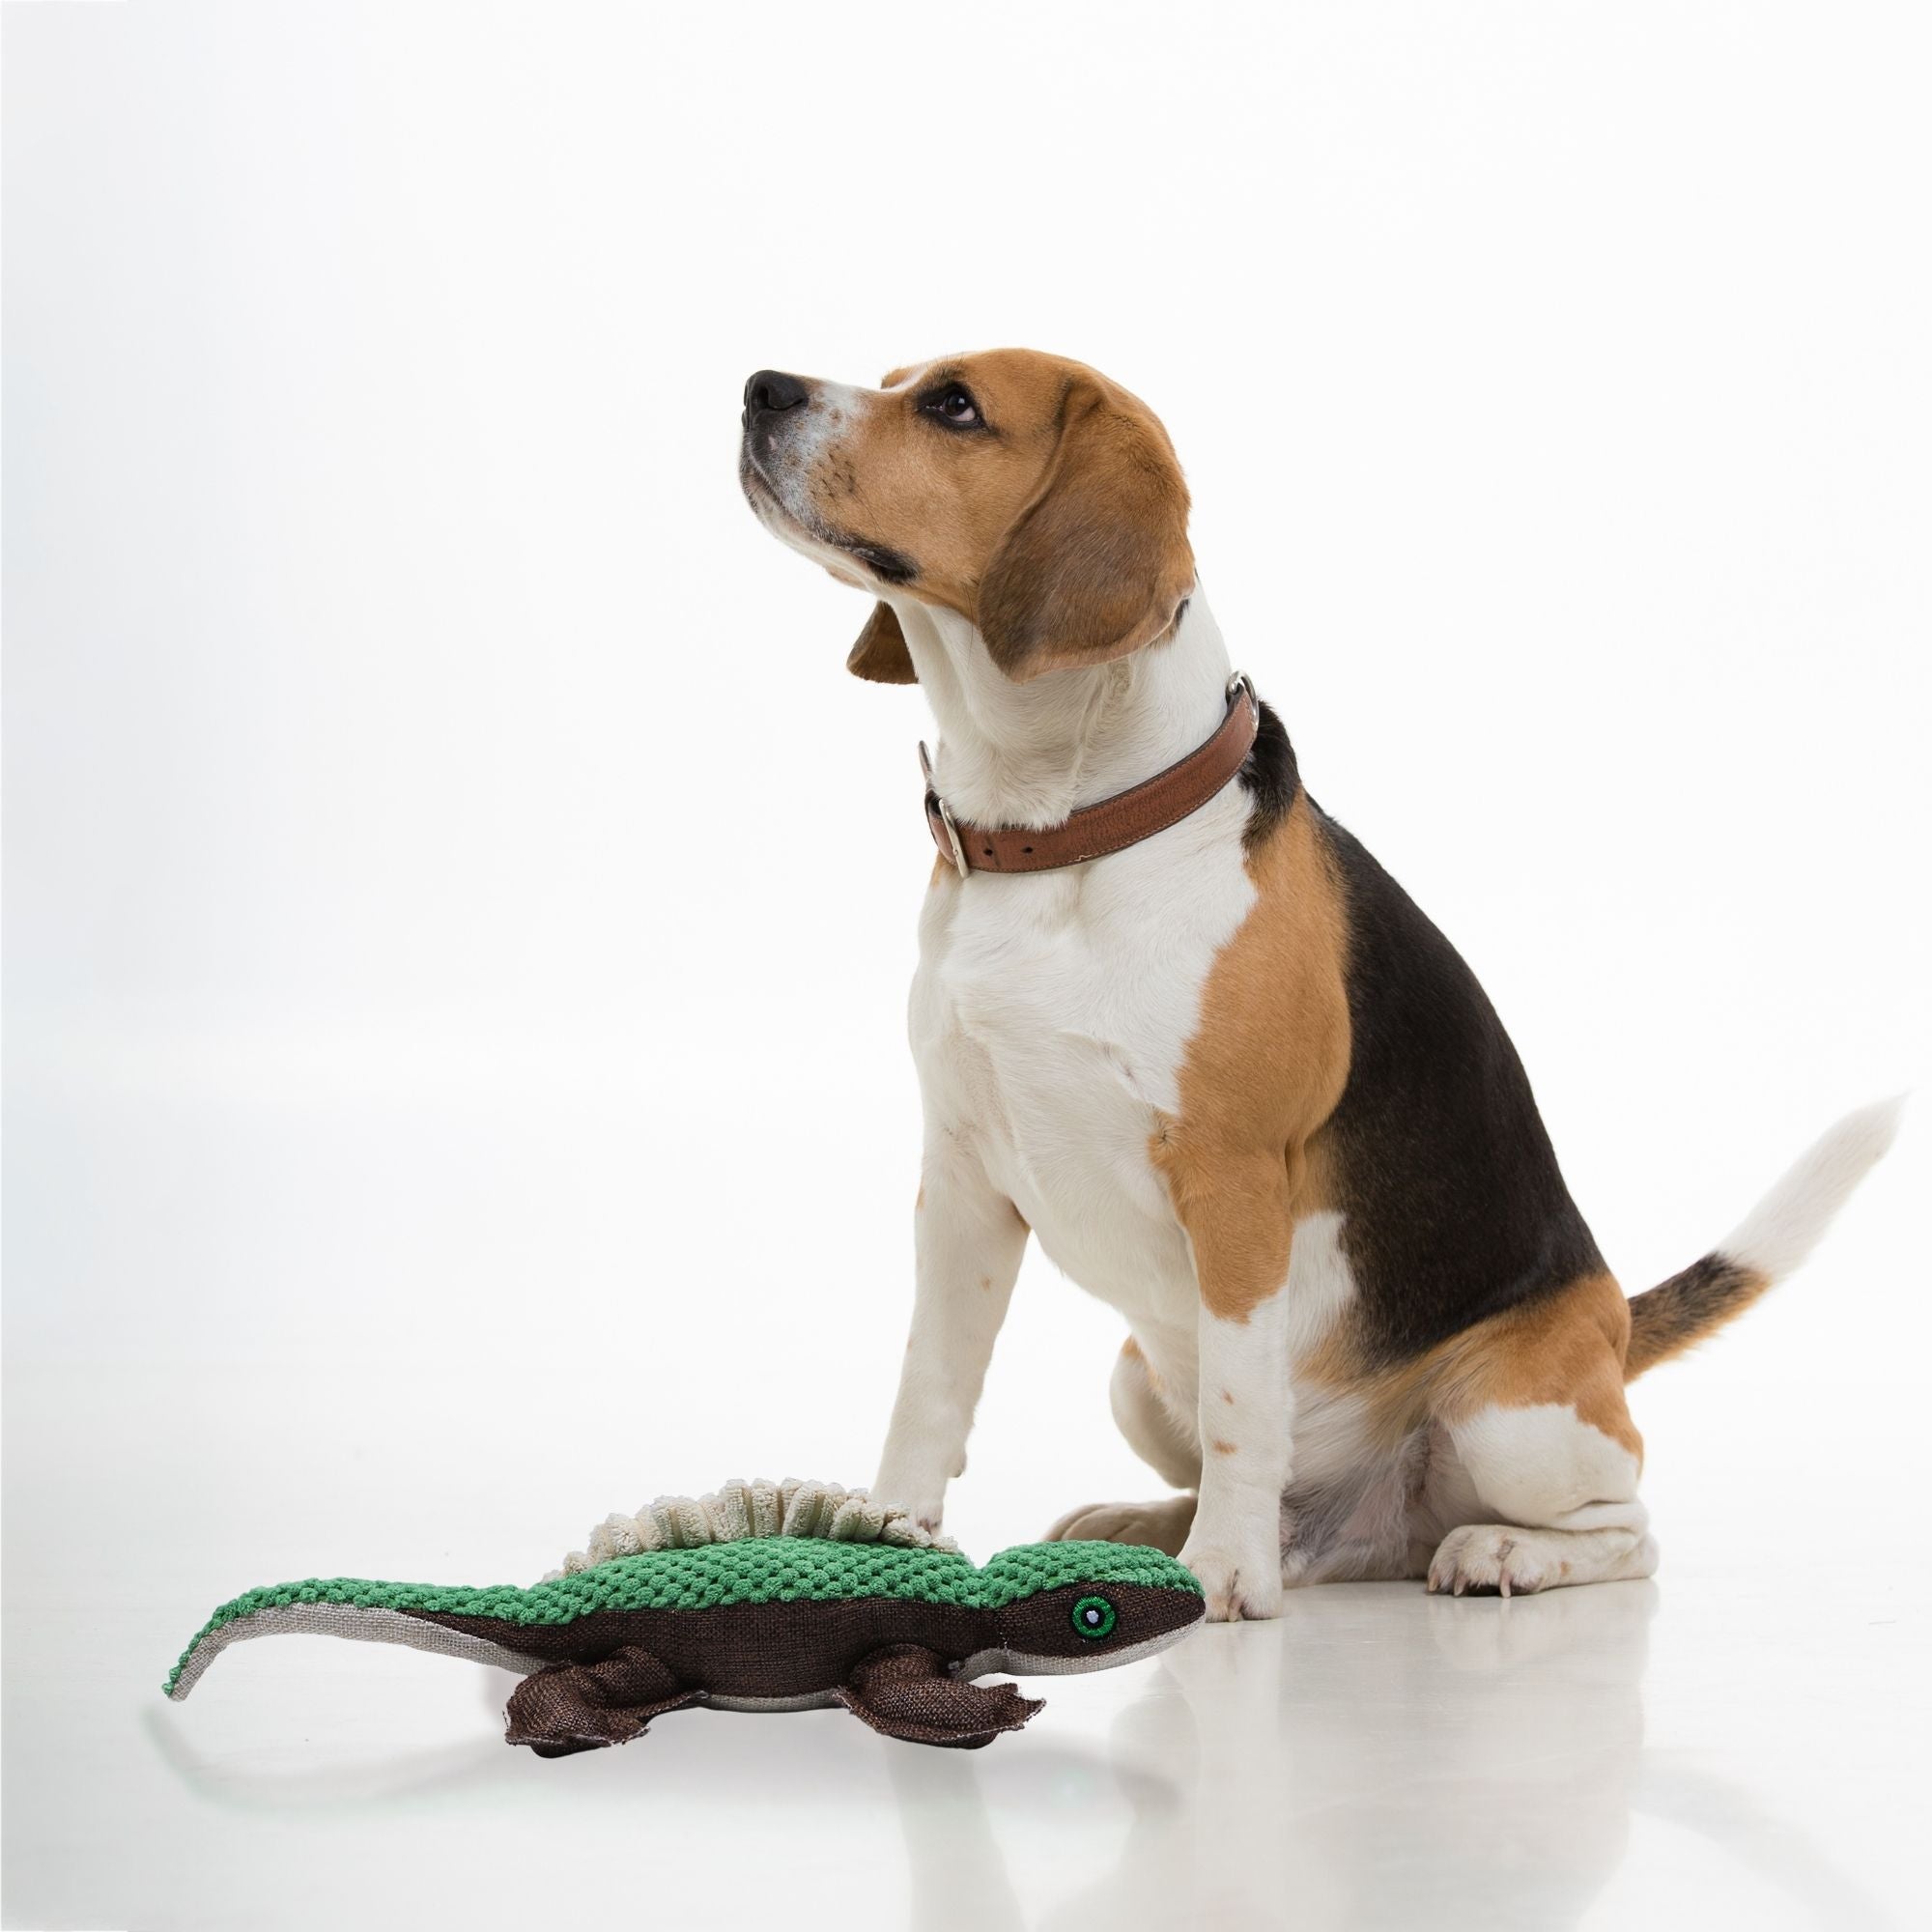 Waggy The Gator Soft Plush Dog Toy For All Dogs